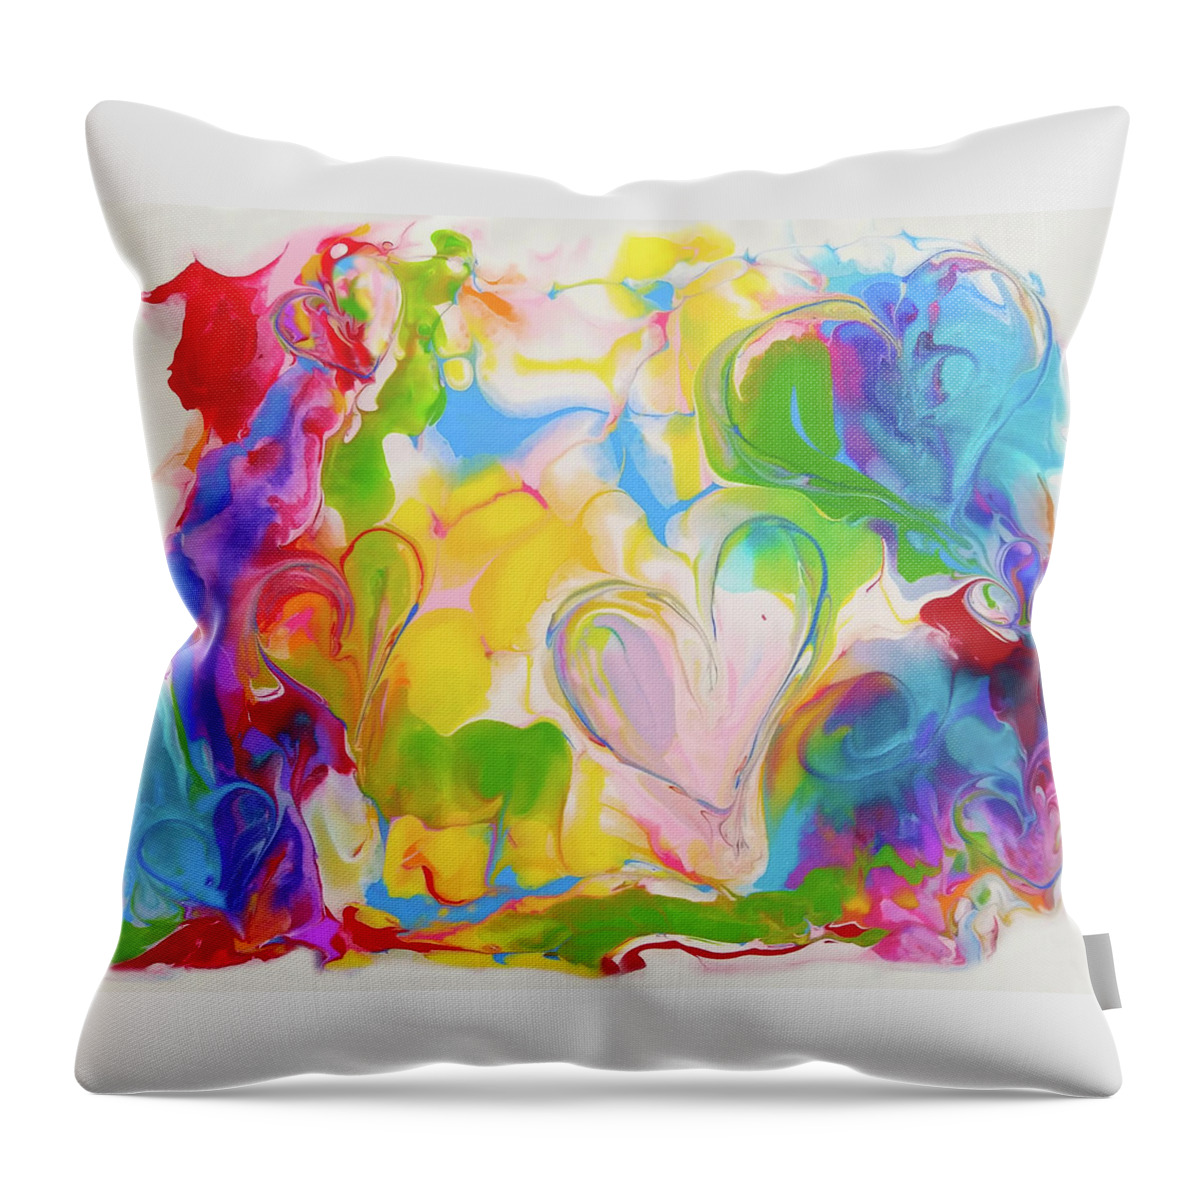 Colorful Throw Pillow featuring the painting Love Happy by Deborah Erlandson